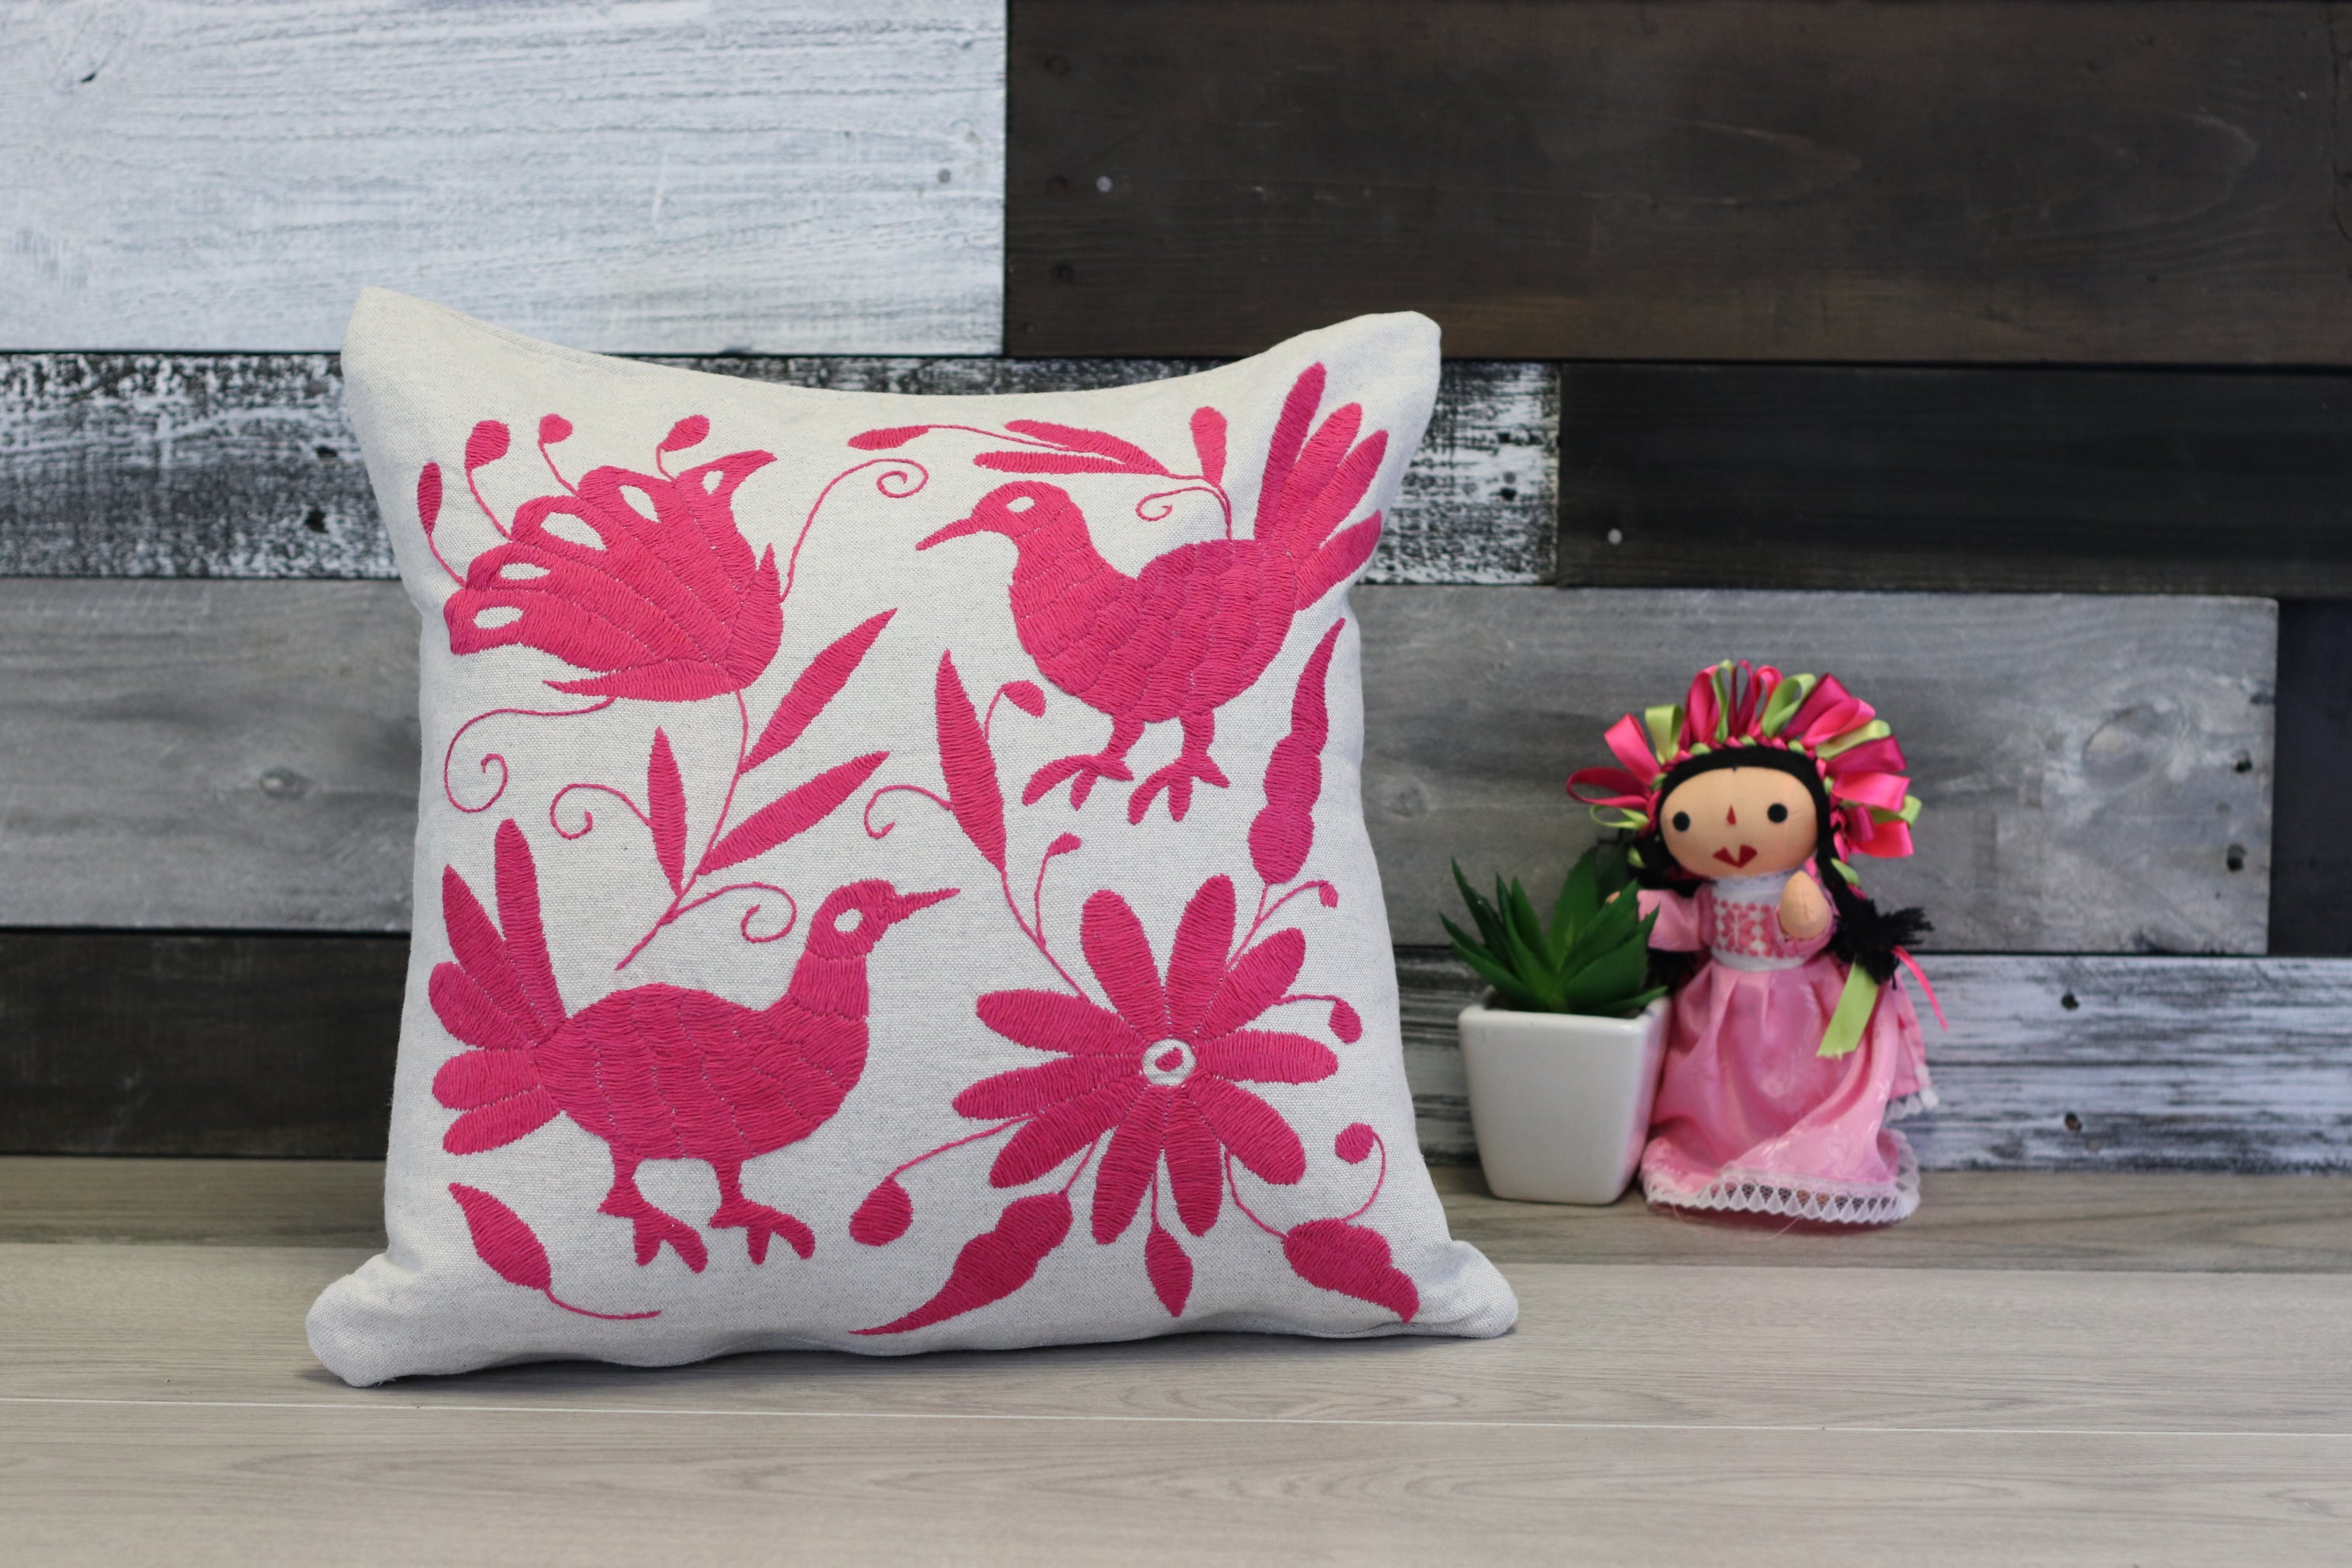 Pink Hand Embroidered Bird and Flower Pillow Cover on Gray Background. Handmade in Mexico. Ships from the USA. Buy now at www.felipeandgrace.com.  